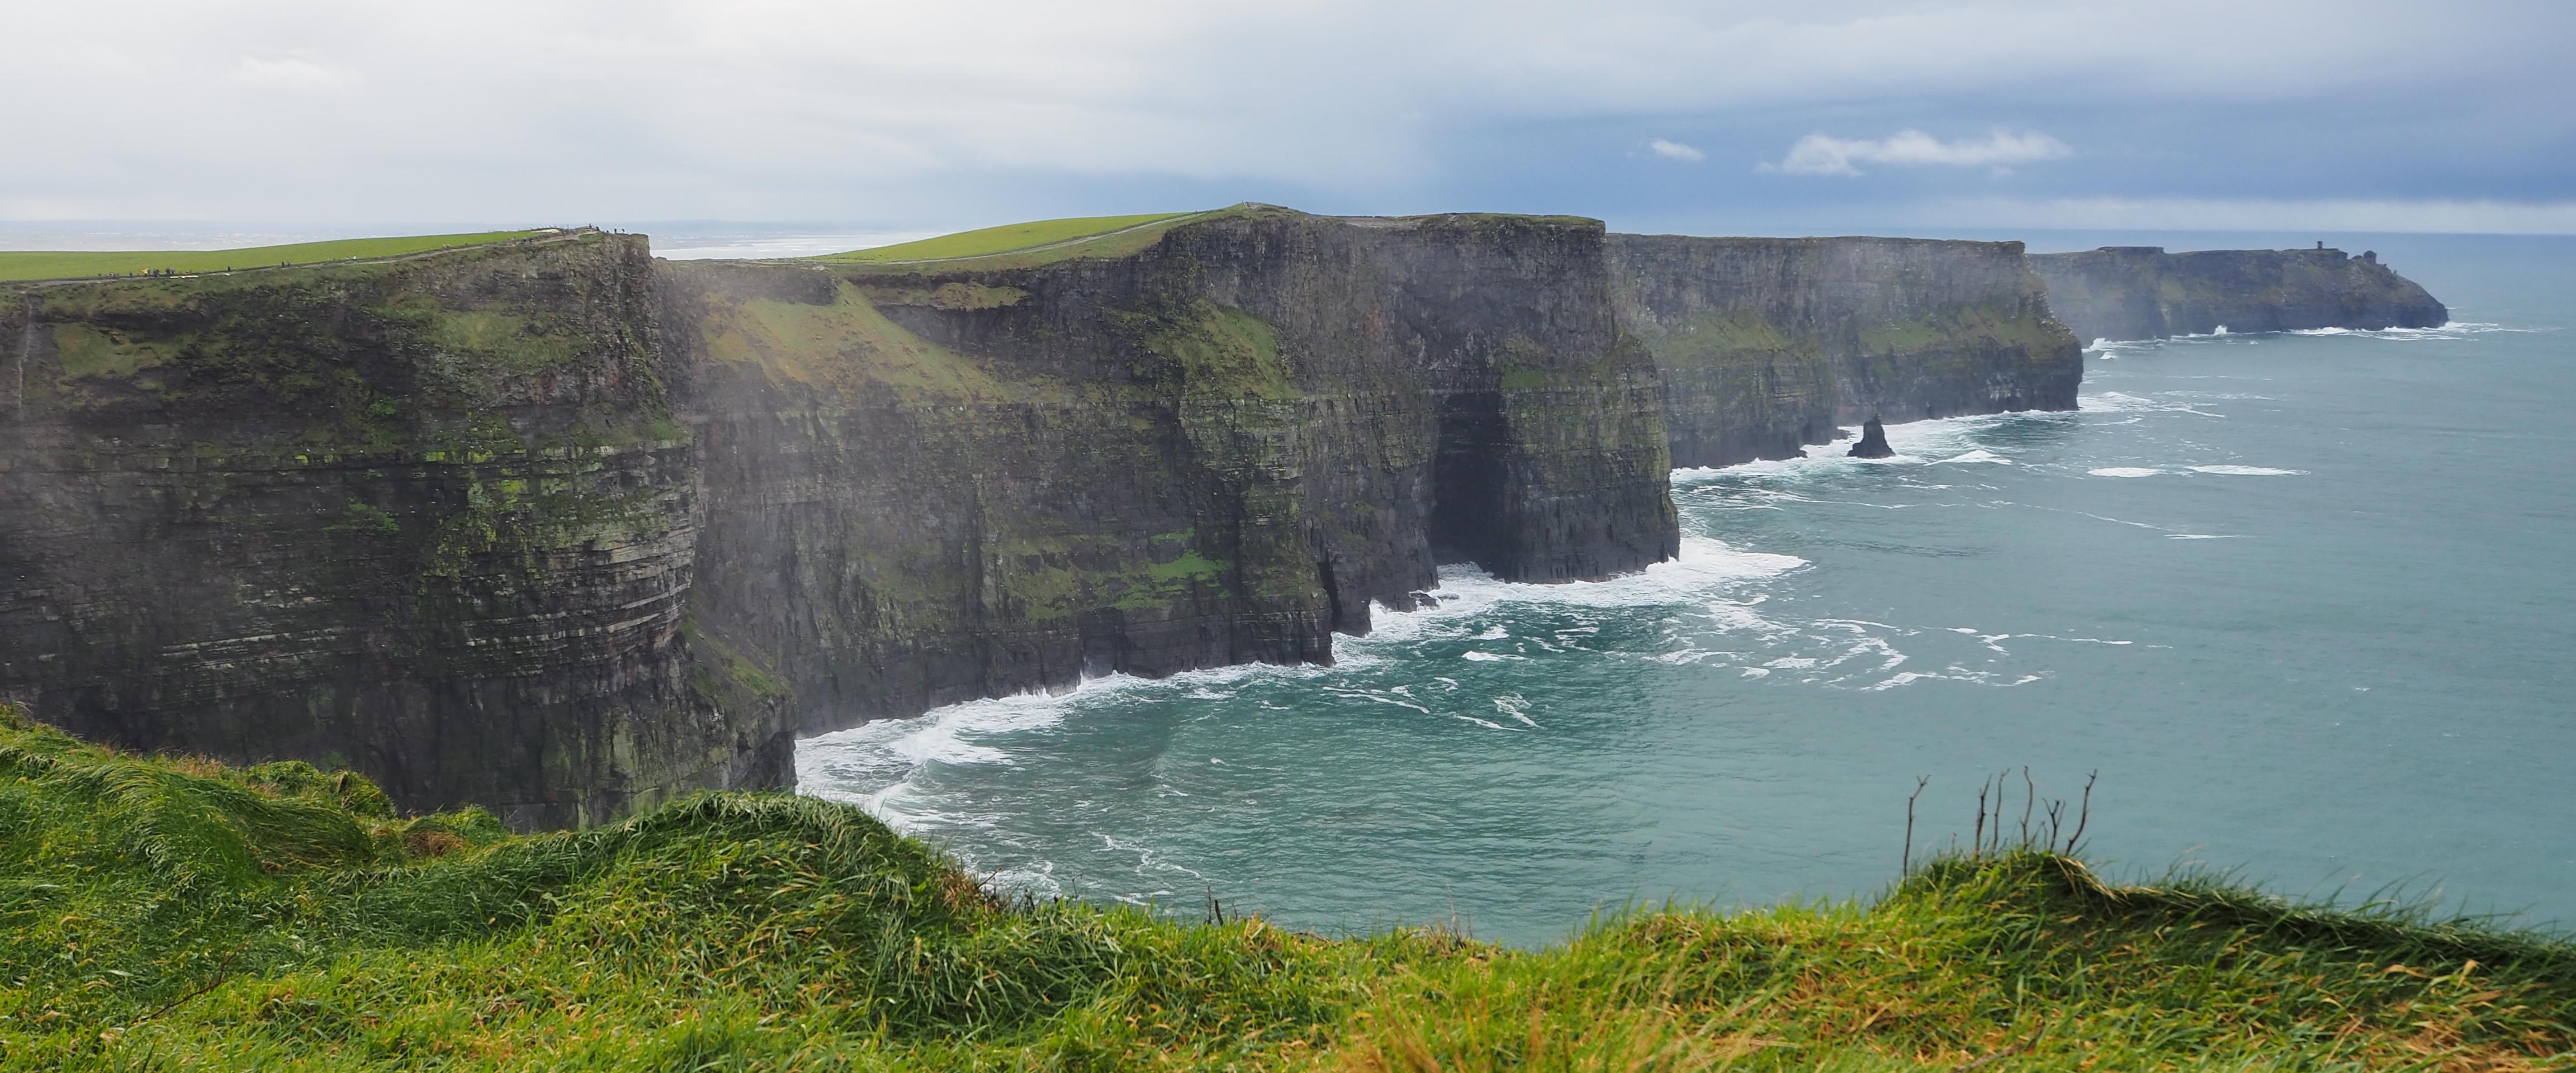 Excursion to the Cliffs of Moher – Boat Tour Included – Departing from Dublin